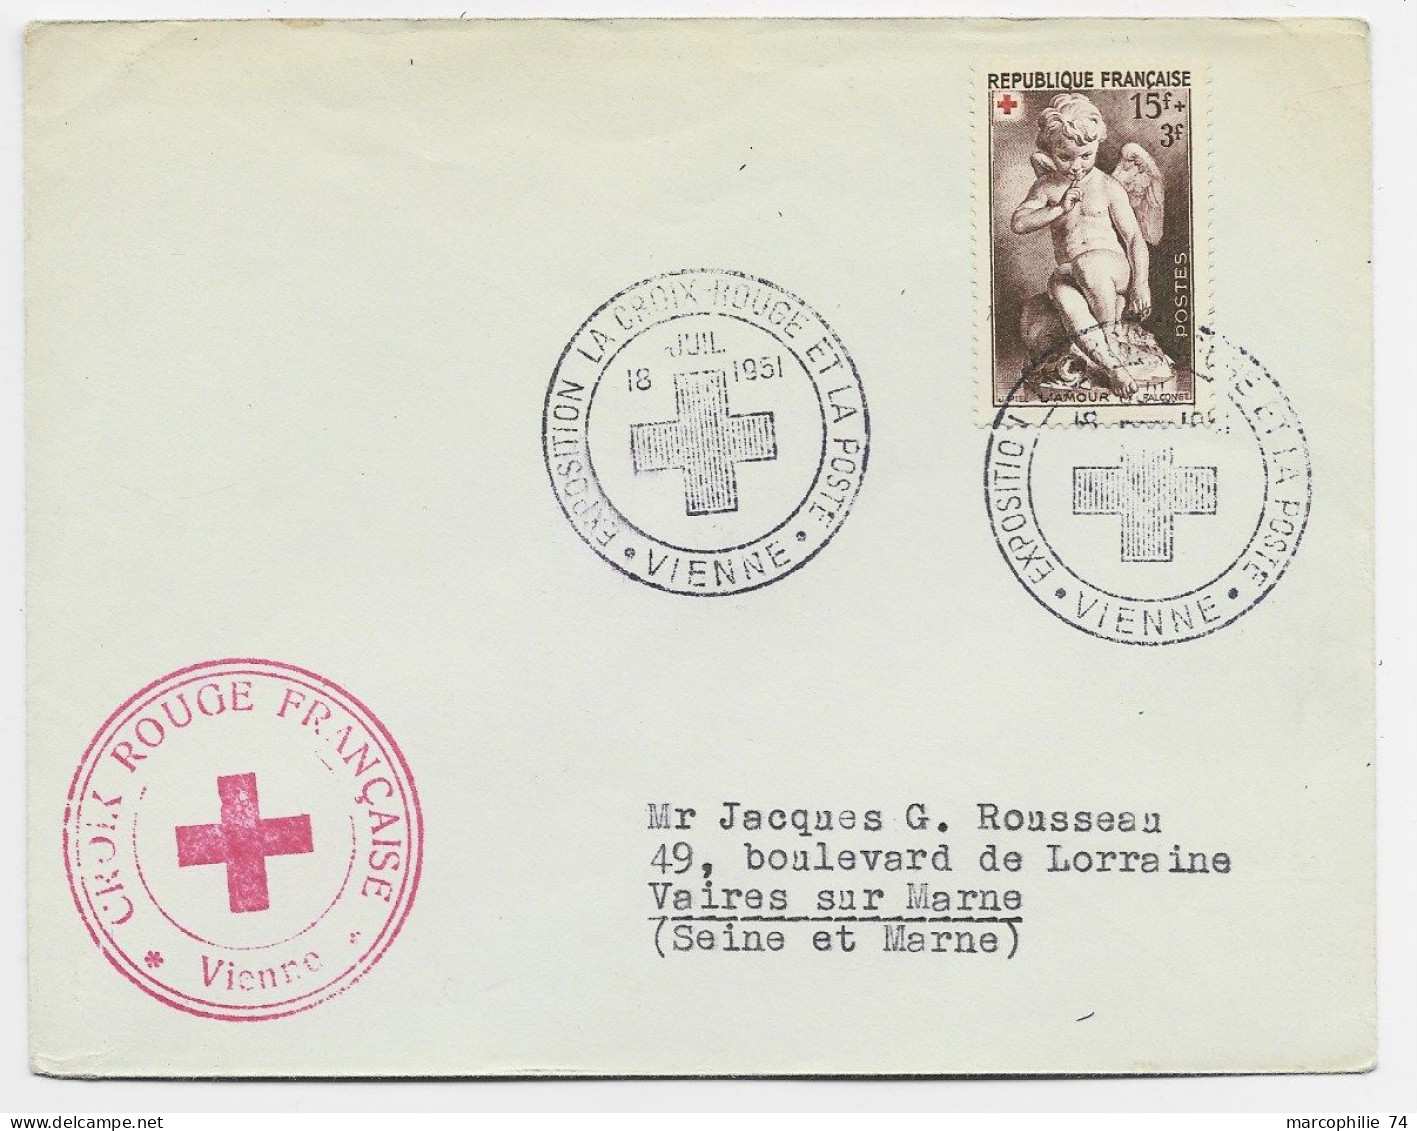 FRANCE CROIX ROUGE 15C LETTRE COVER EXPO CROIX ROUGE 18 JUIL 1951 VIENNE - Red Cross